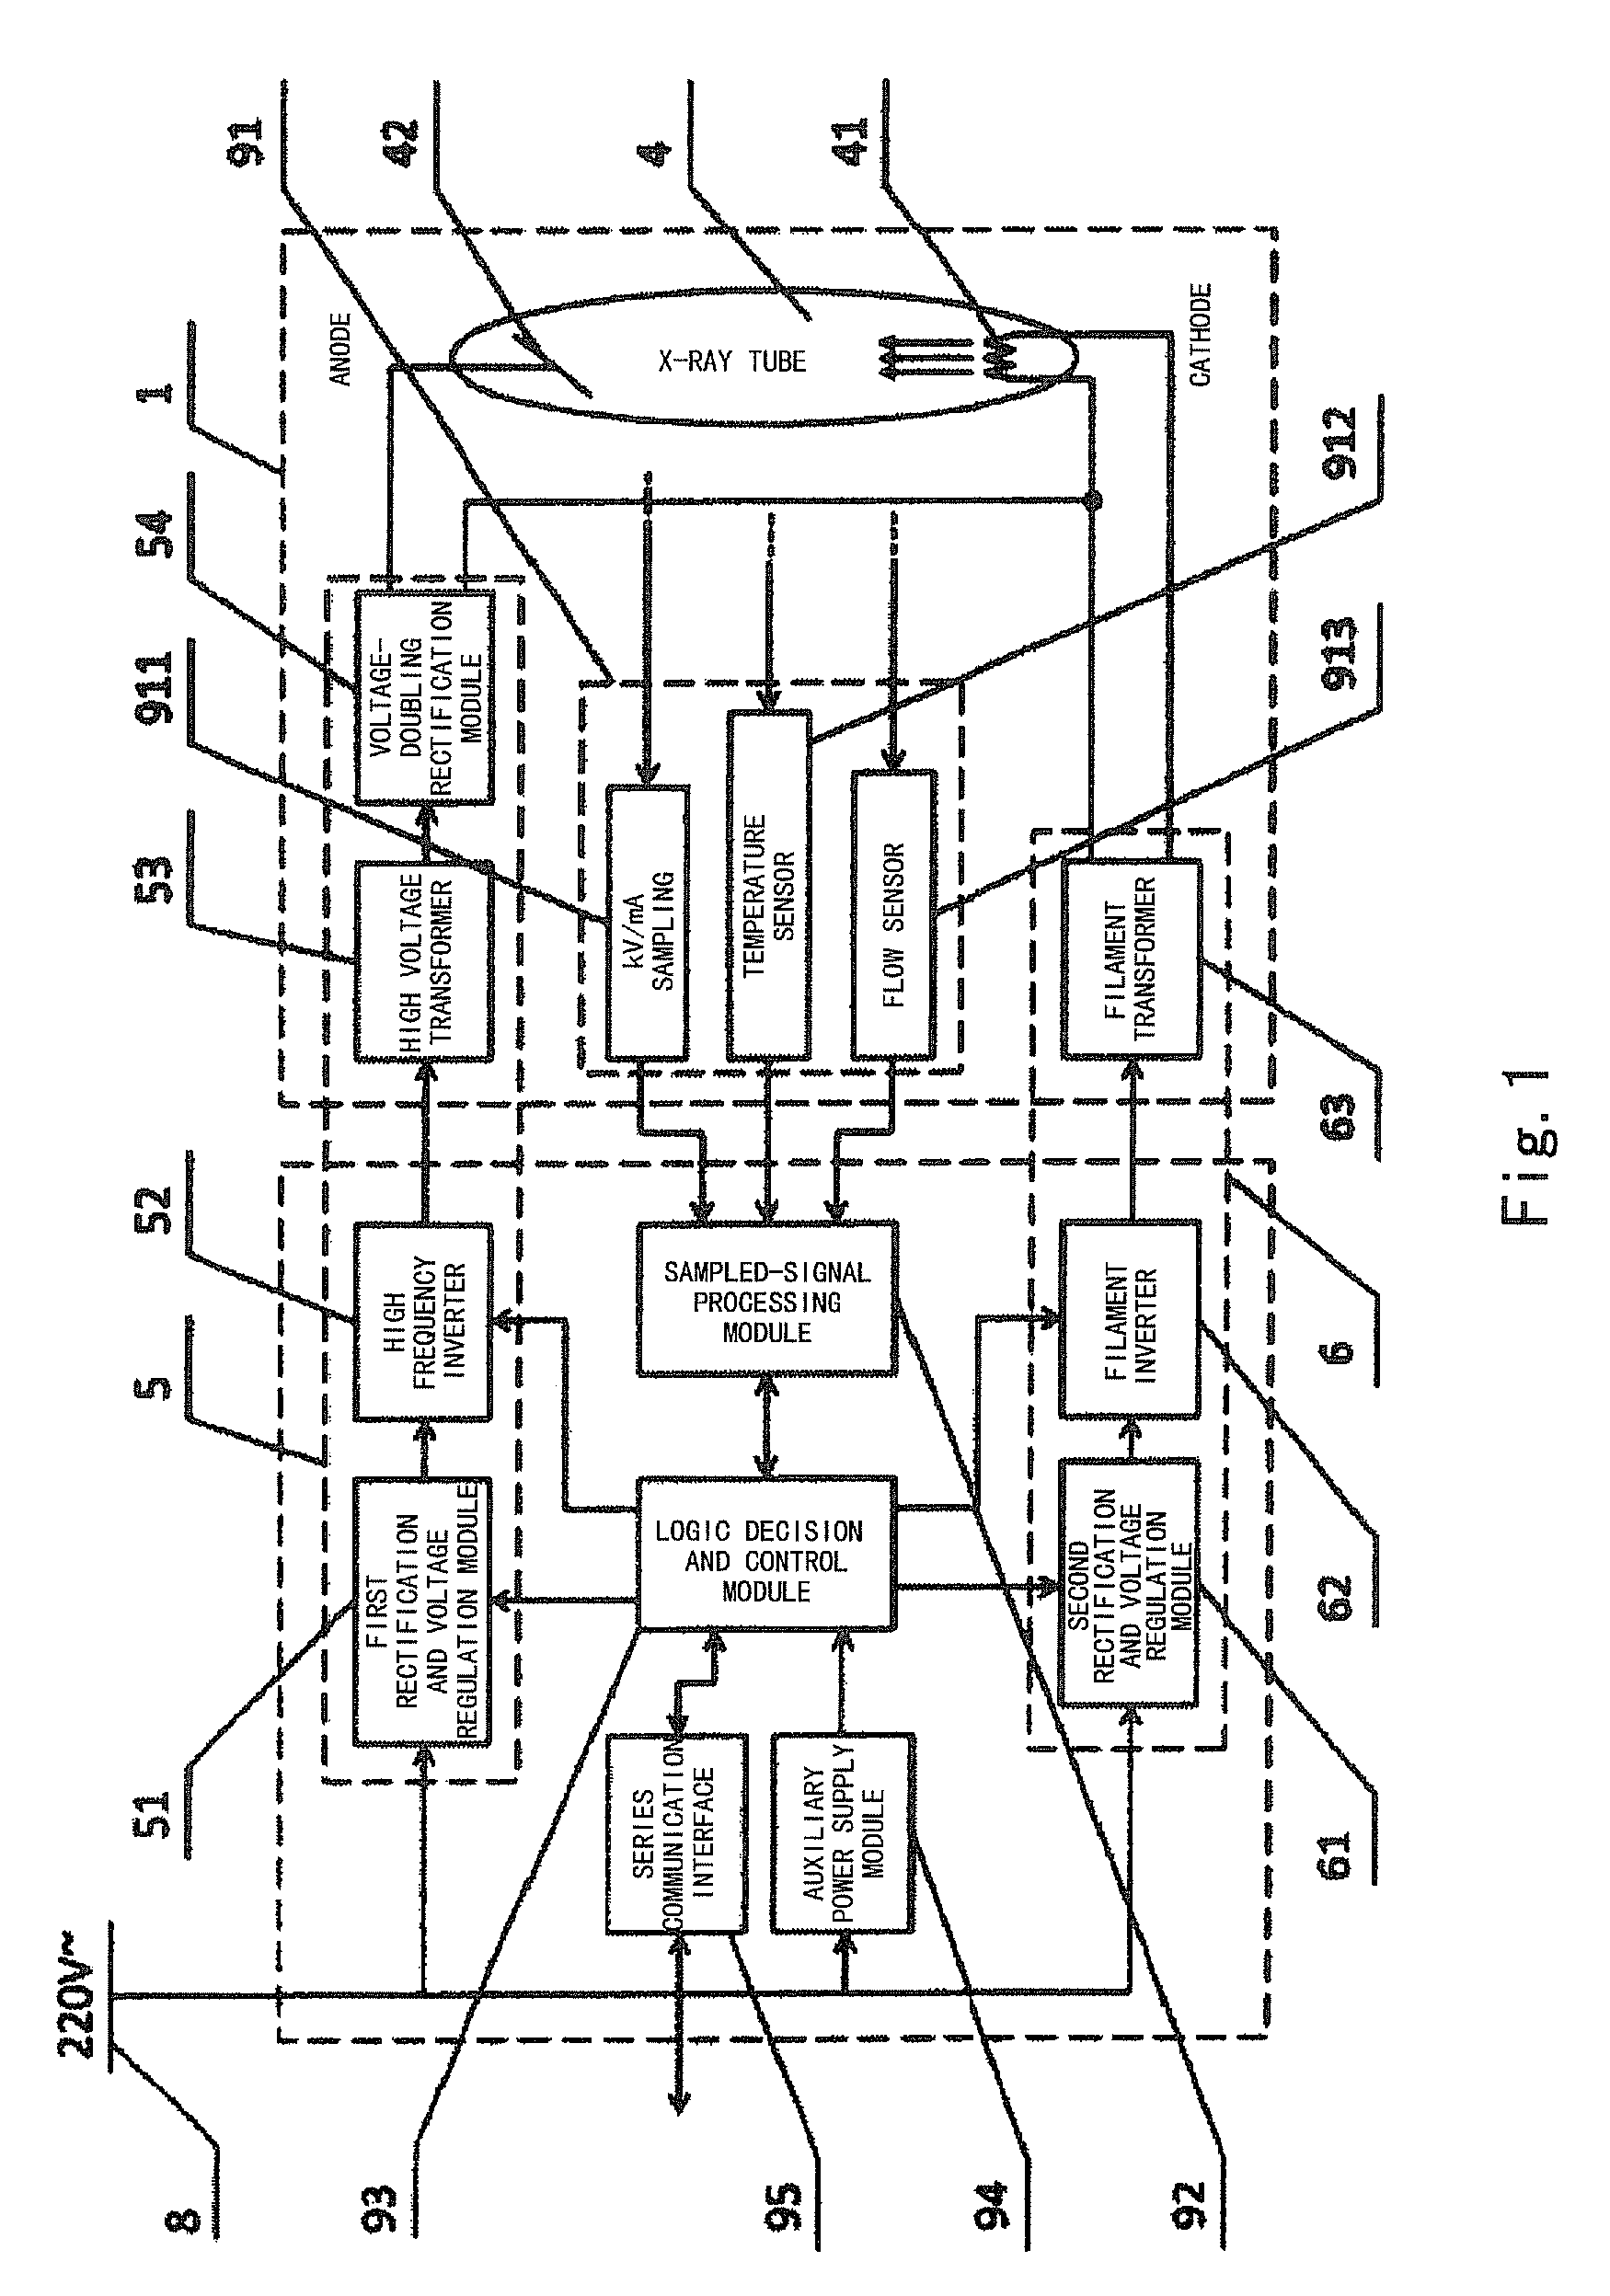 Installation case for radiation device, oil-cooling circulation system and x-ray generator